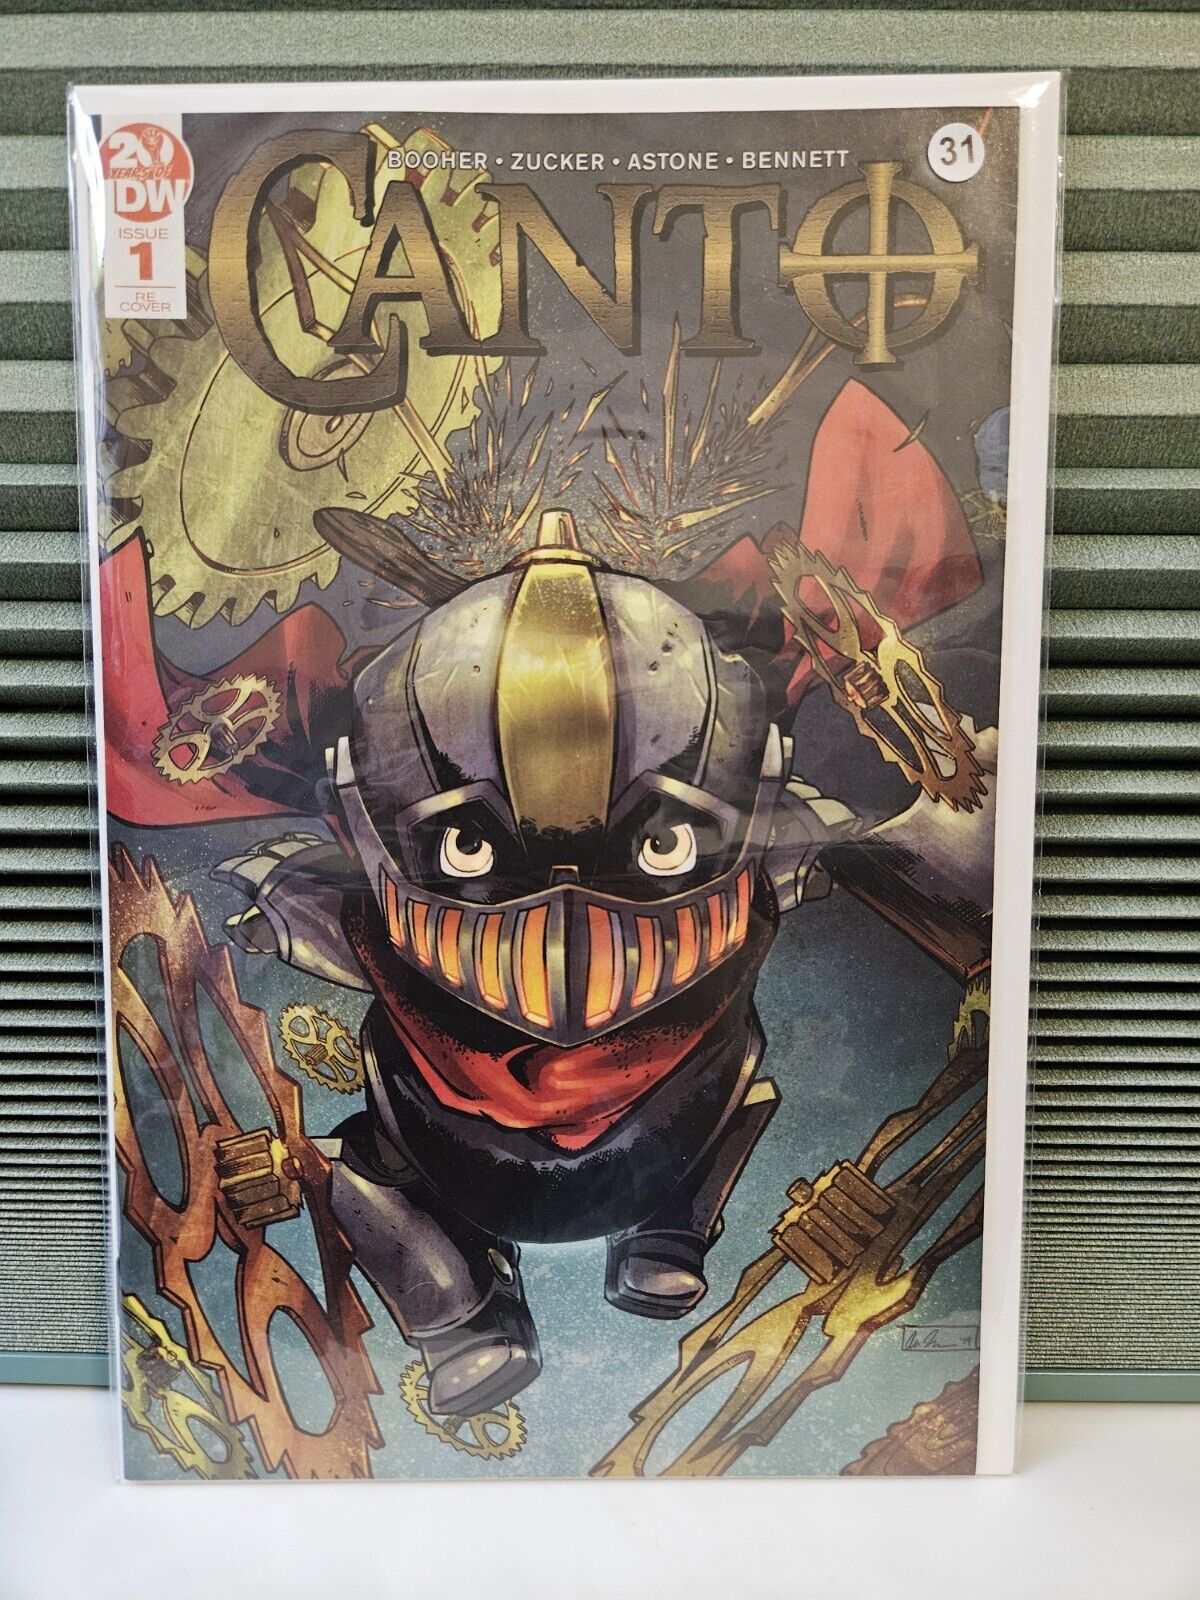 RARE 2019 Canto #1 Planet Awesome Edition 3rd Printing Drew Zucker Exclusive